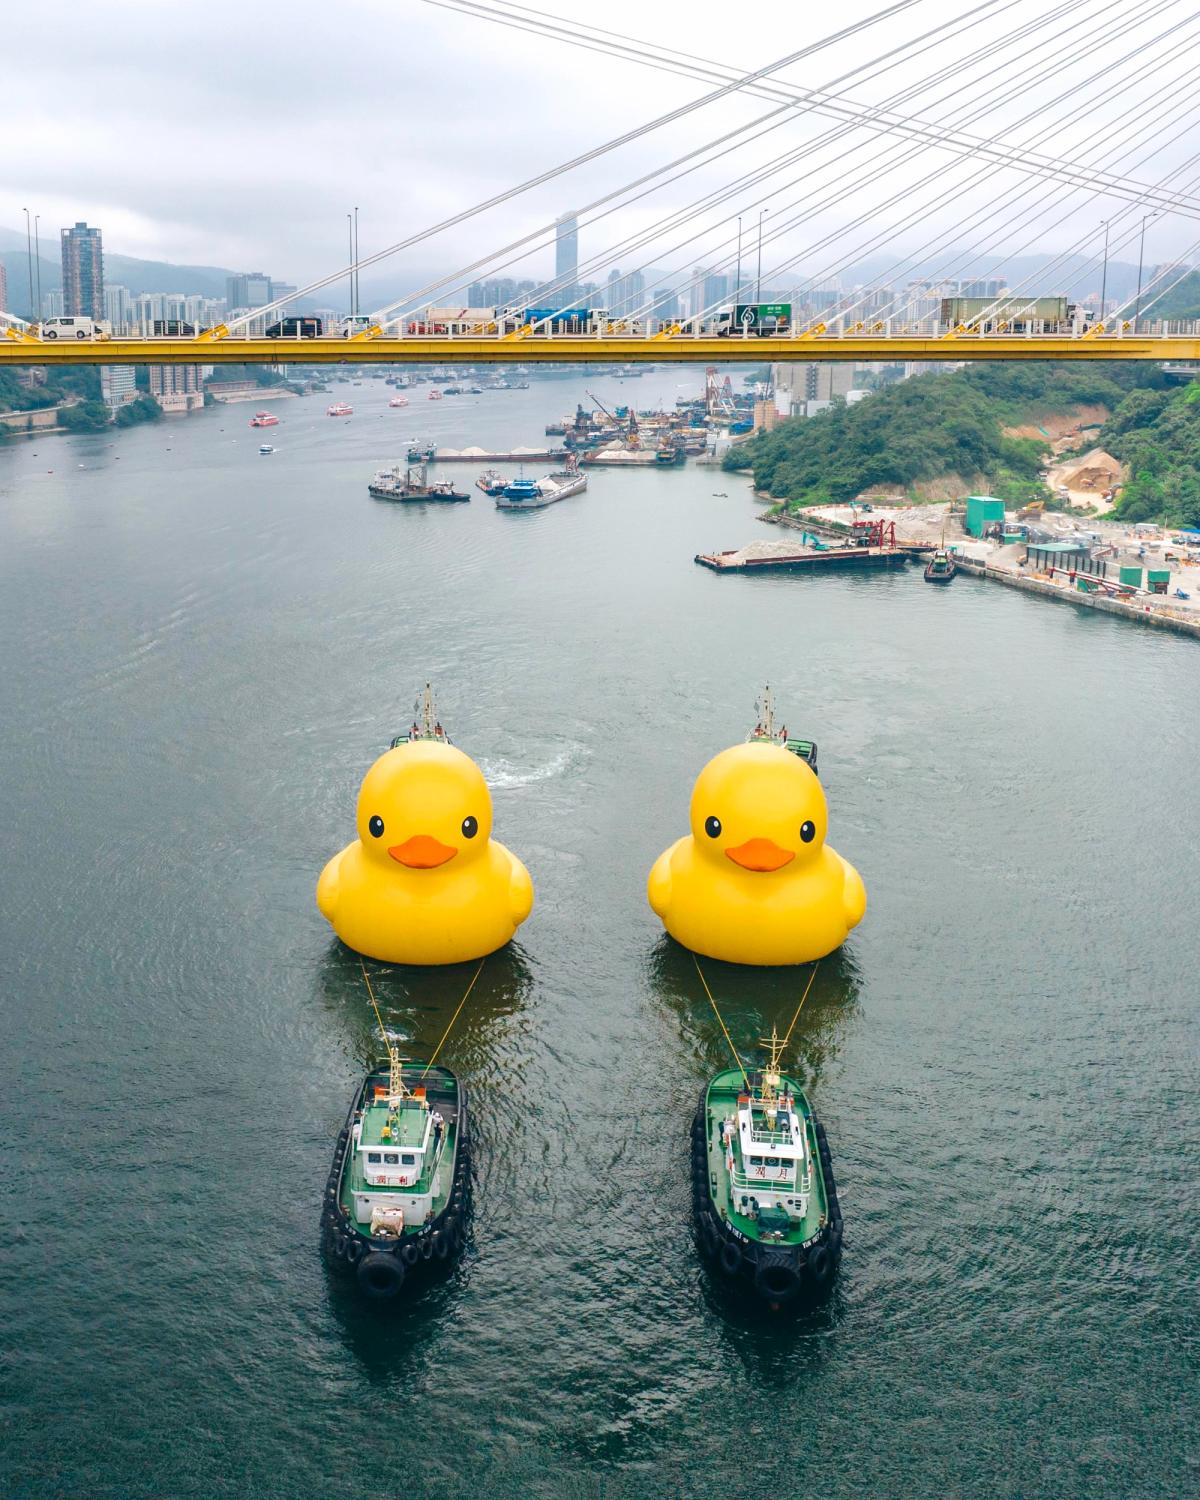 Florentijn Hofman’s Rubber Duck returned to Hong Kong, this time with a friend Photo: courtesy of AllRightsReserved
